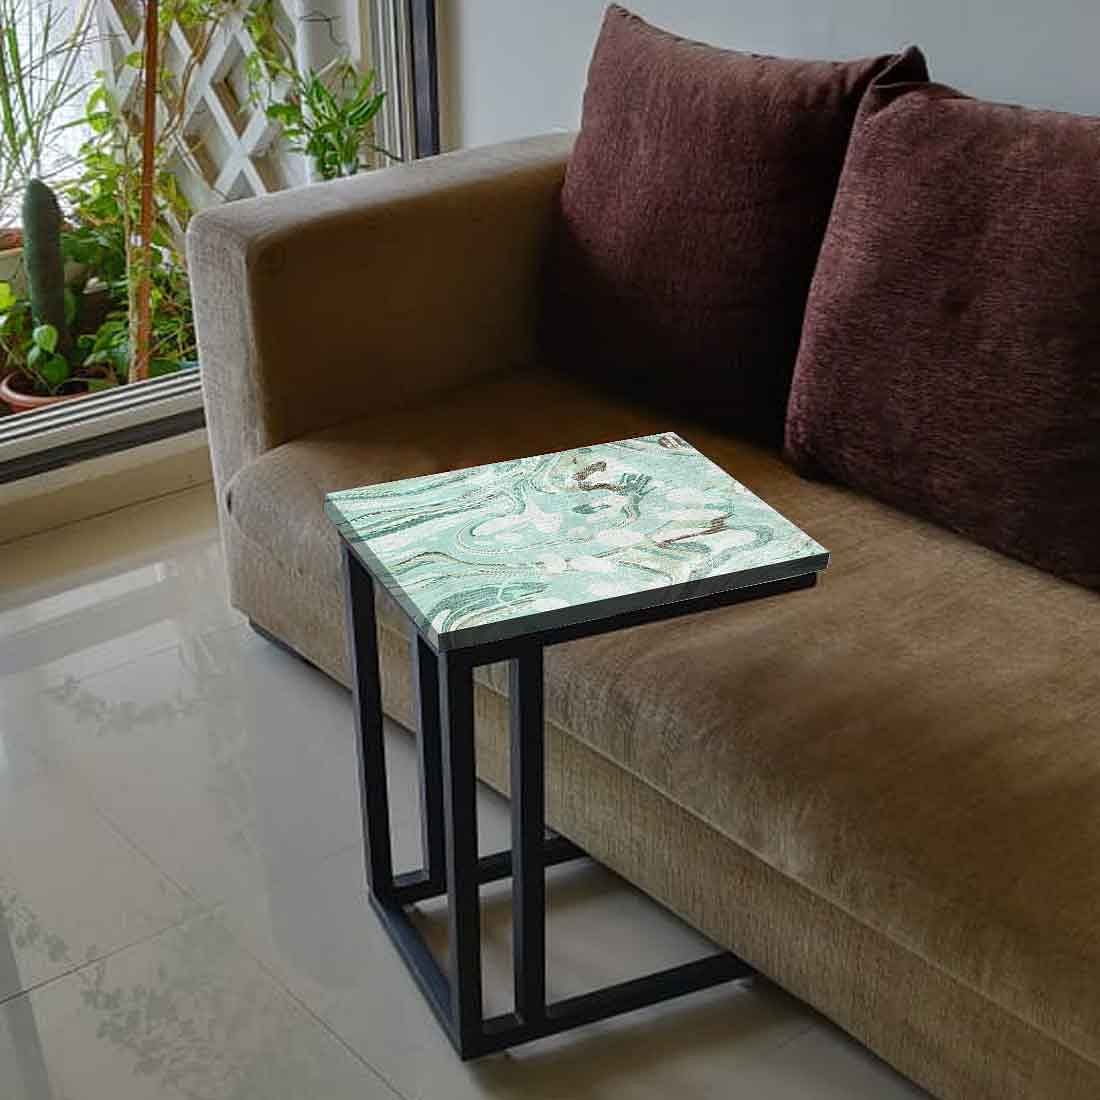 Green Marble C Table For Sofa -Digital Print - Not Real Marble - Green Effect Nutcase